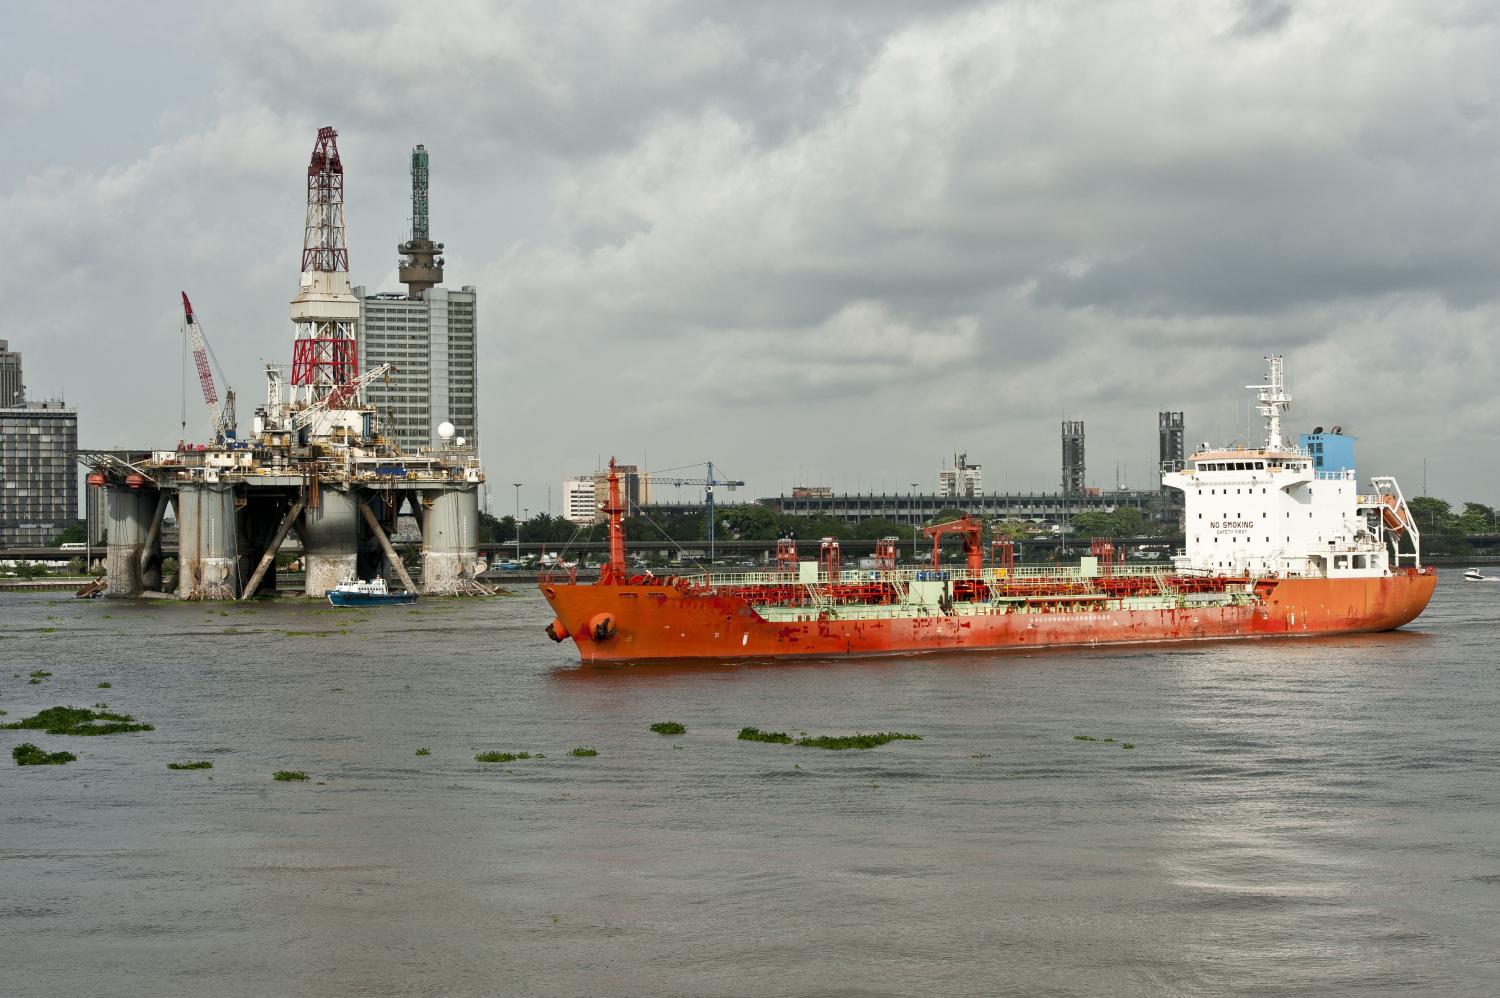 Ship with oil rig in the background in the Nigerian capitol Lagos